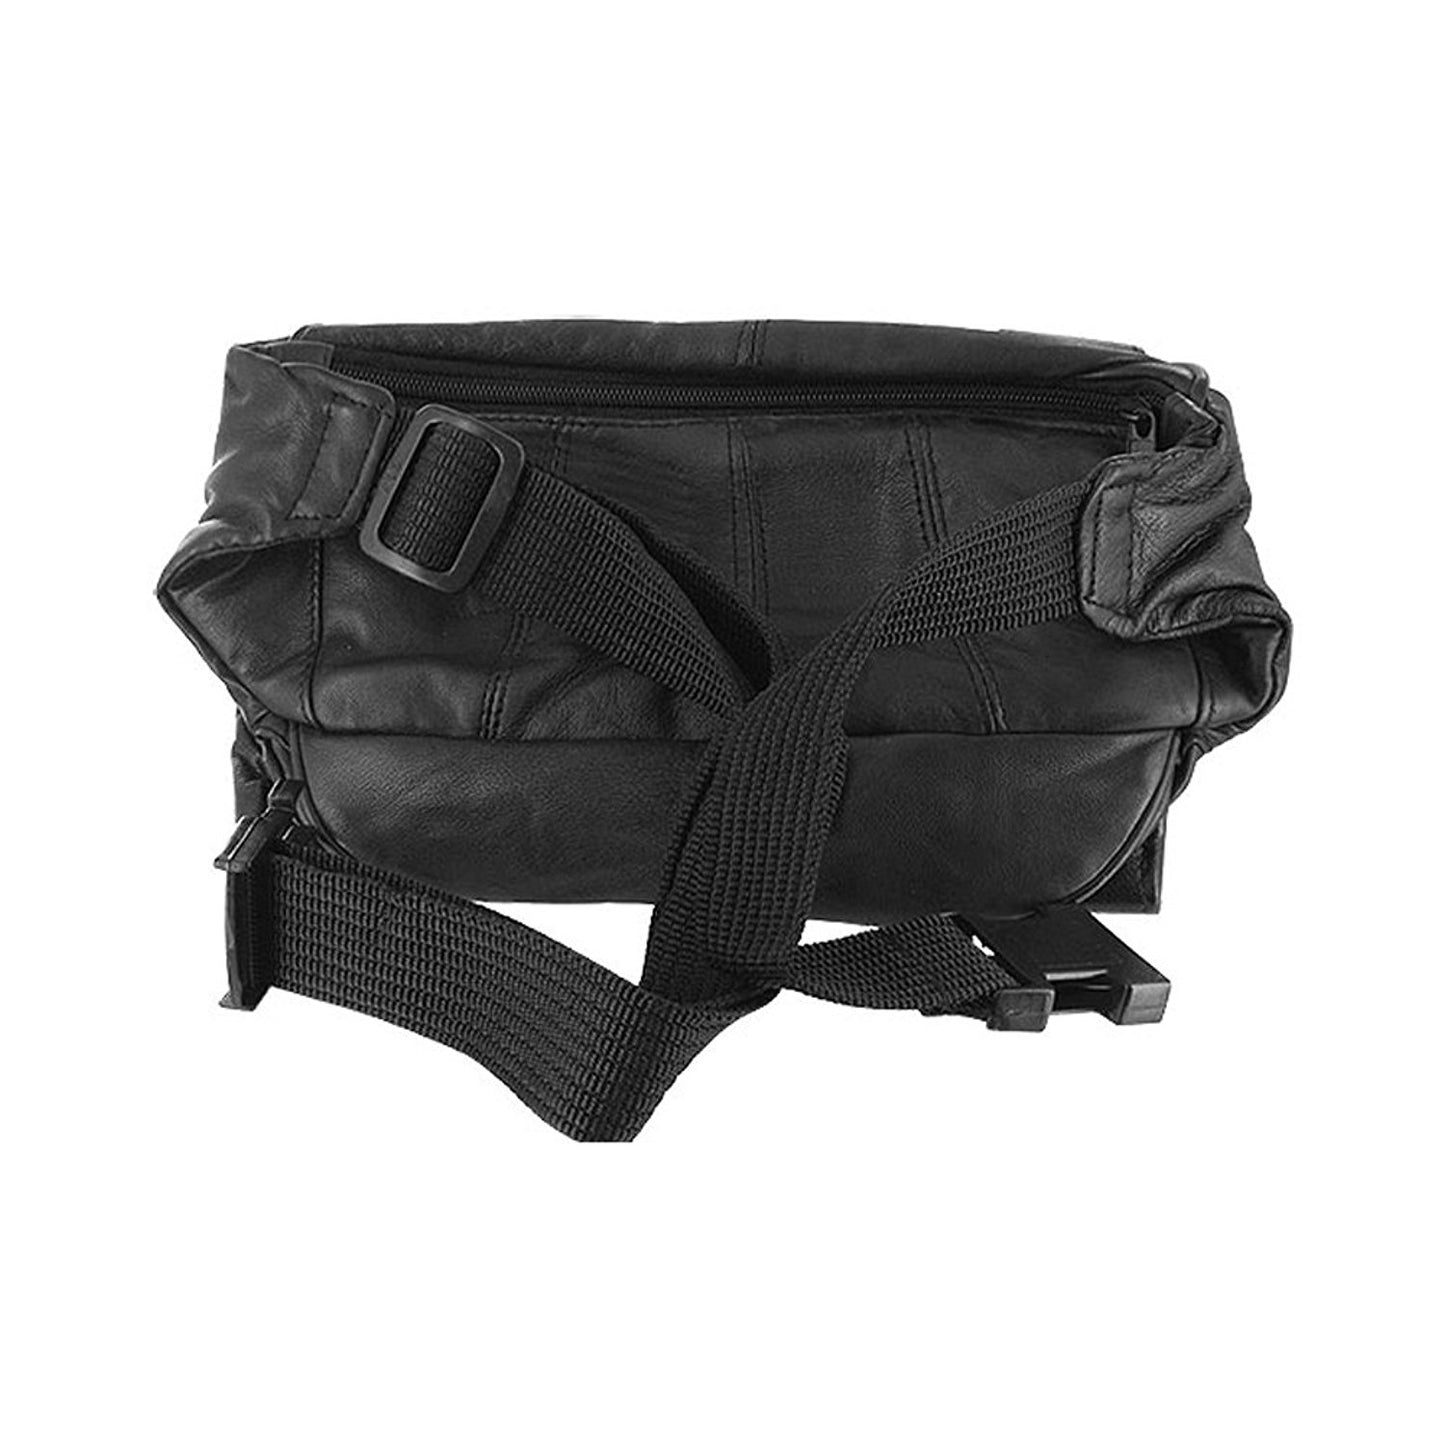 Genuine Leather Black Fanny Pack Waist Bag with Cell Phone Pouch